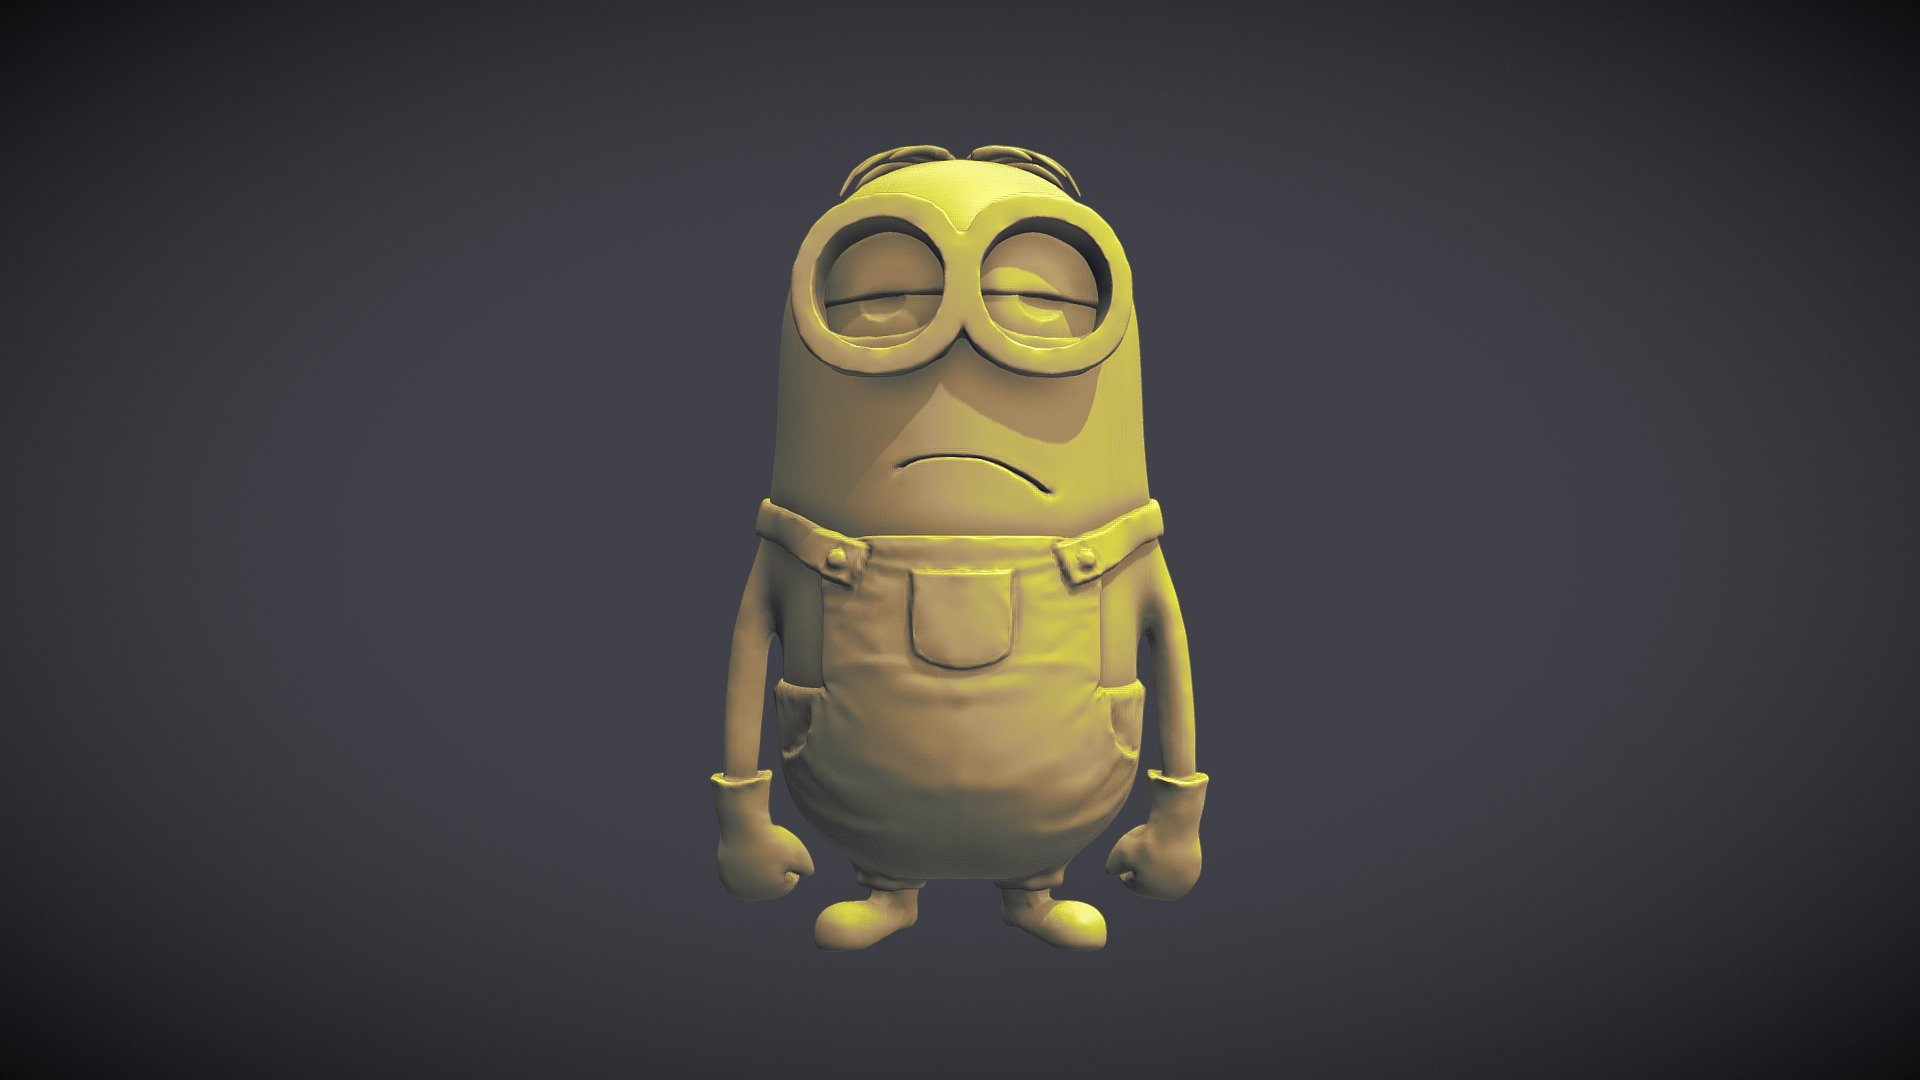 Sculpt January 2018 challenge
17. Boredom - Minion |Time Spent - 80 min
Software Used - ZBrush

It was fun making it 3d model